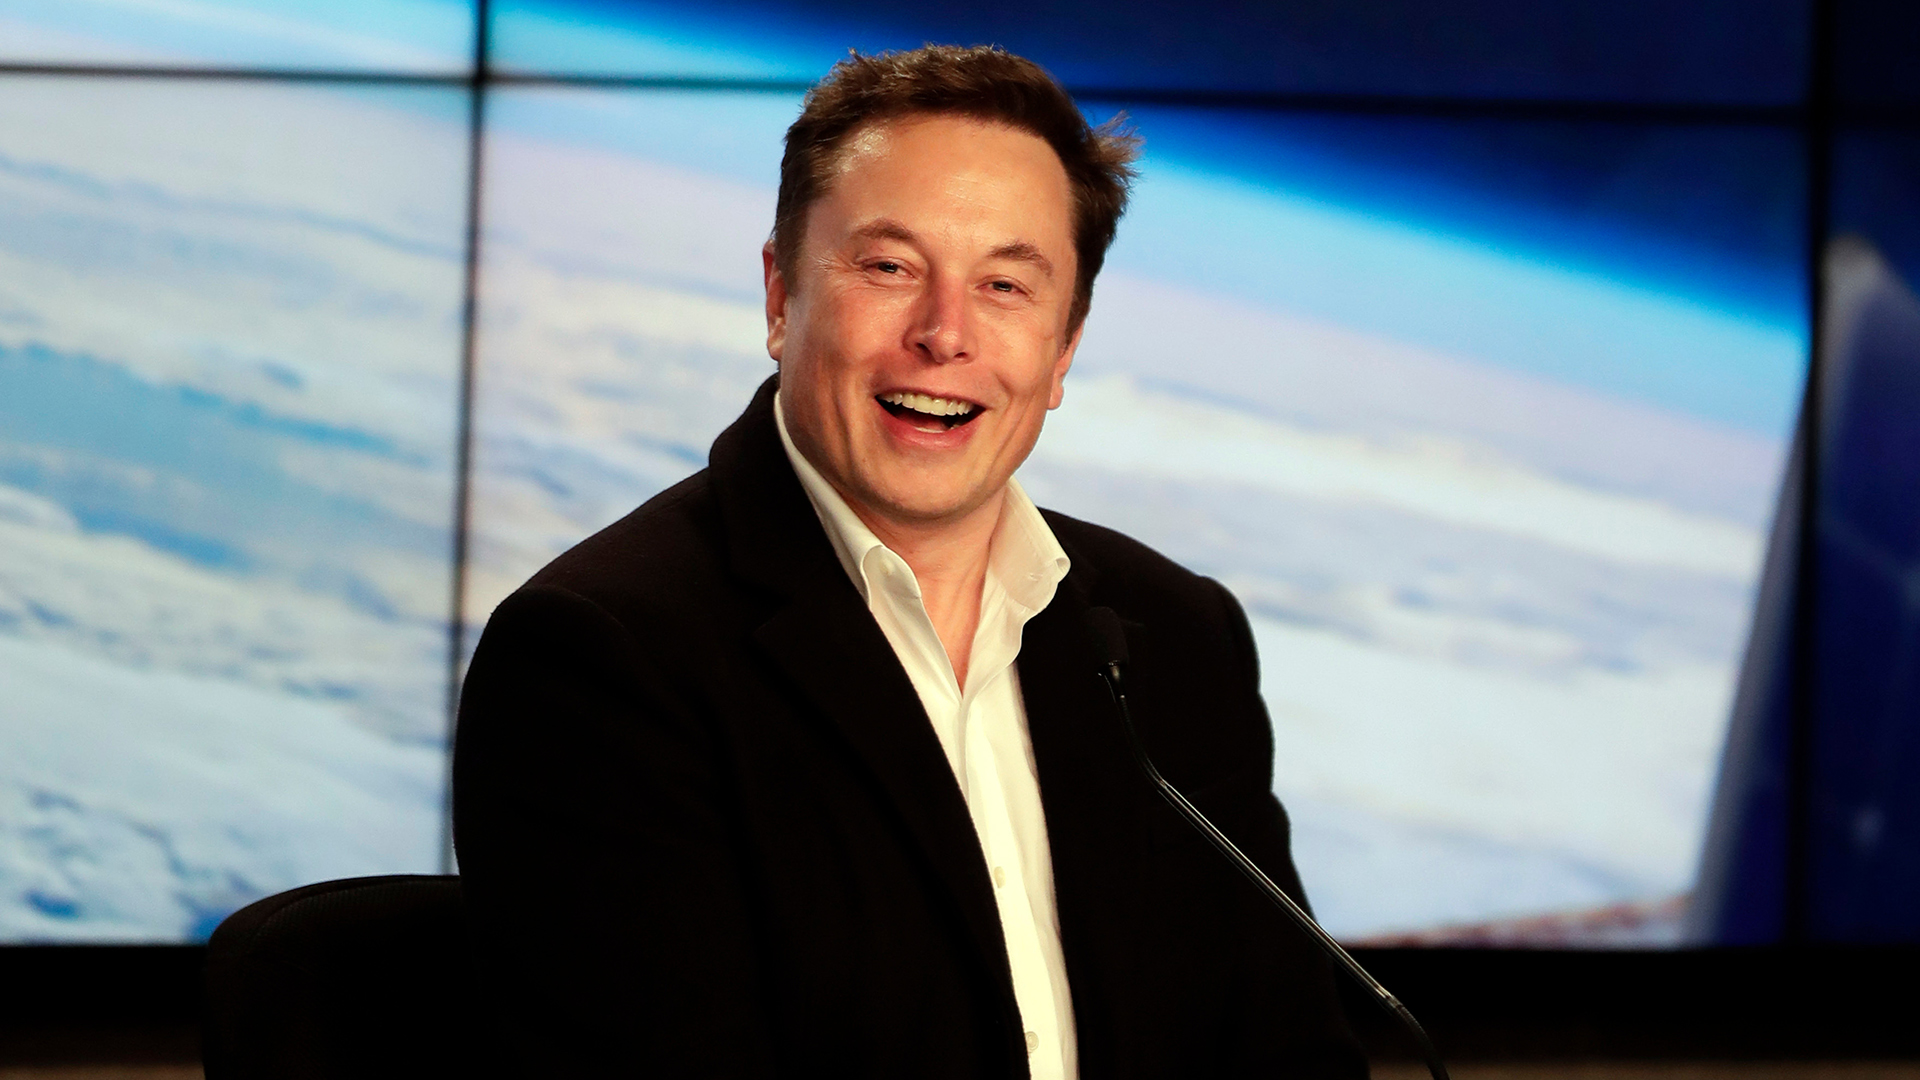 Elon Musk is now the second richest man in the world, surpassing Bill Gates  